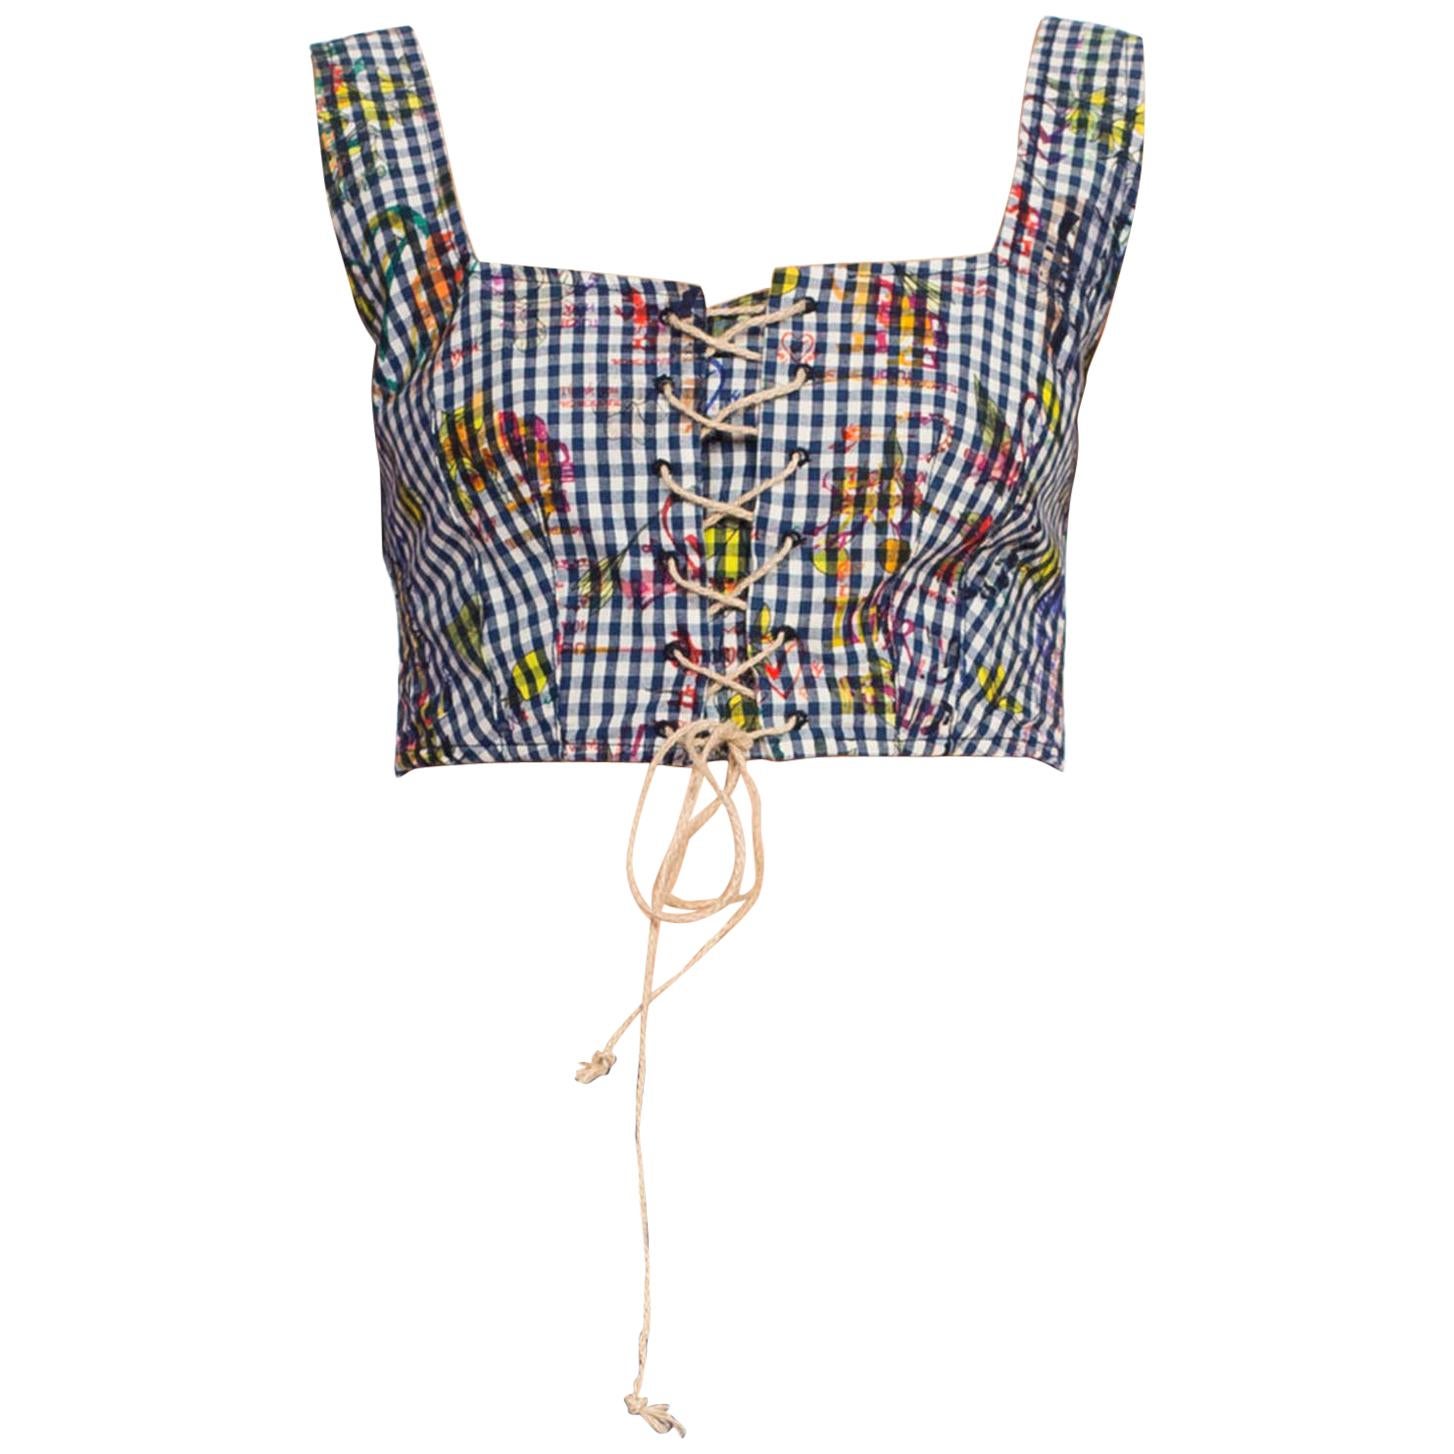 1990S VIVIENNE WESTWOOD Cotton Anglomania Sexy Farm Girl Bustier Top